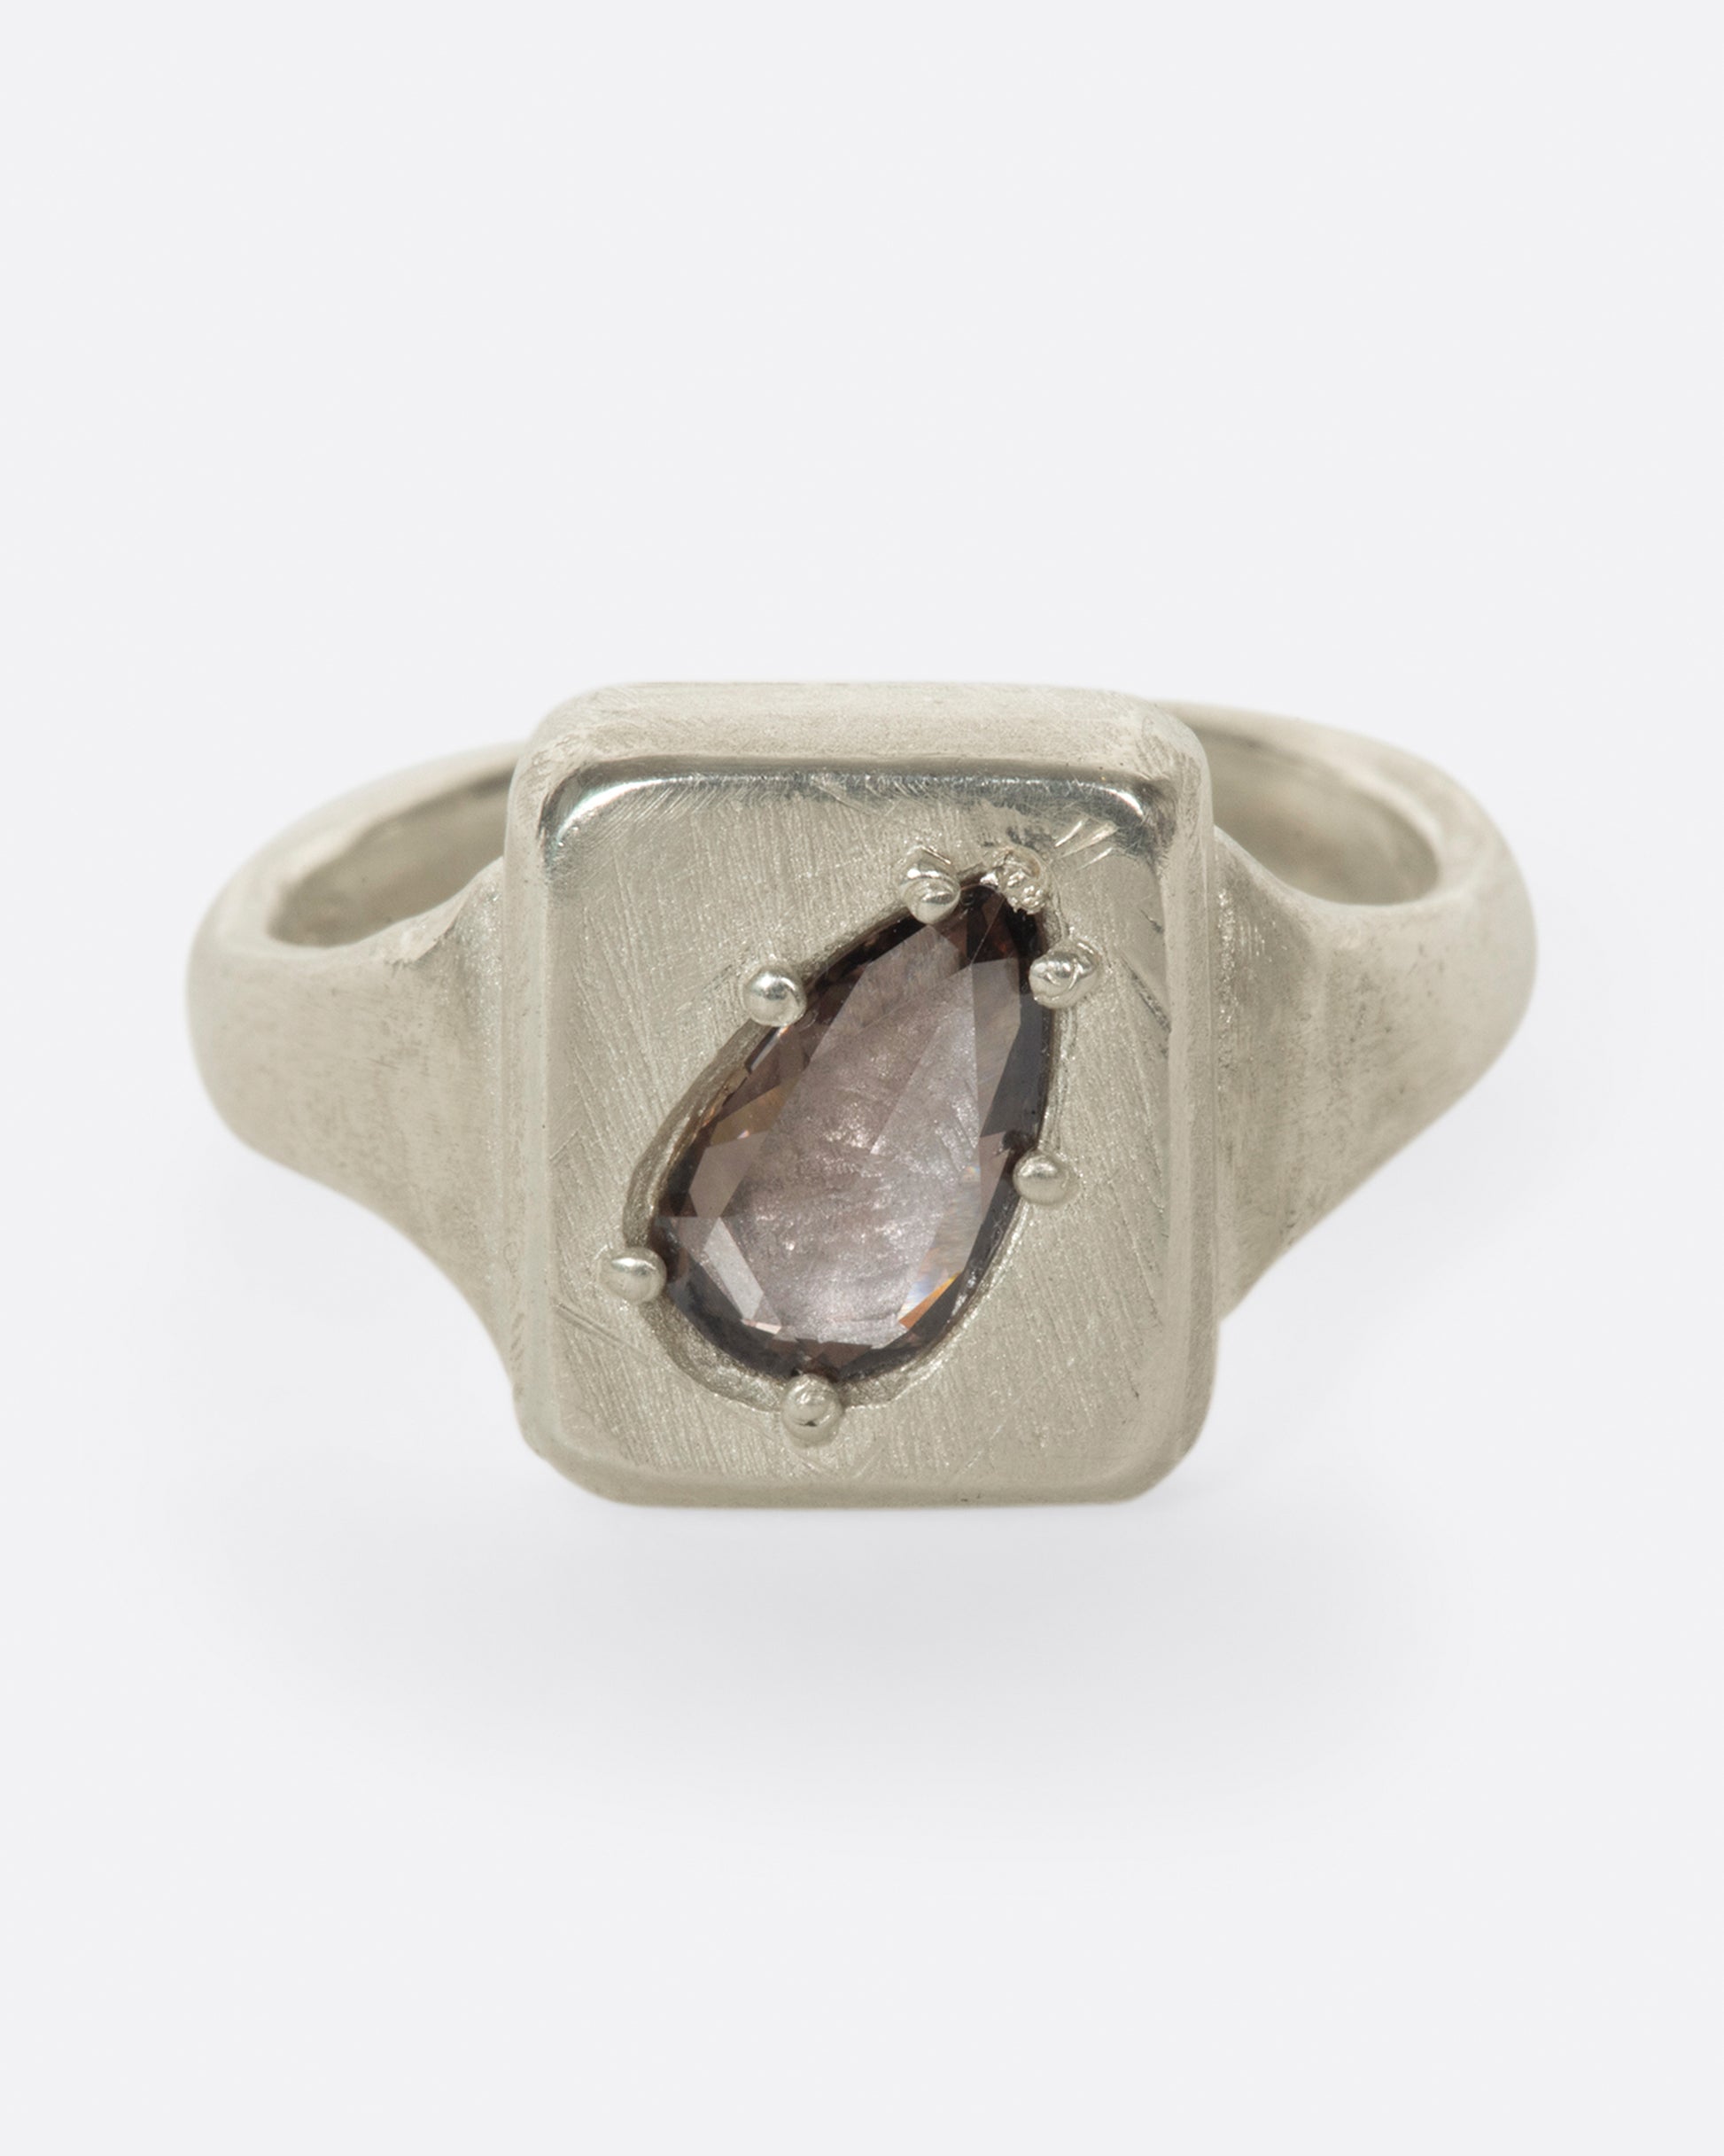 A handmade square signet ring with a cognac diamond sunken into it.